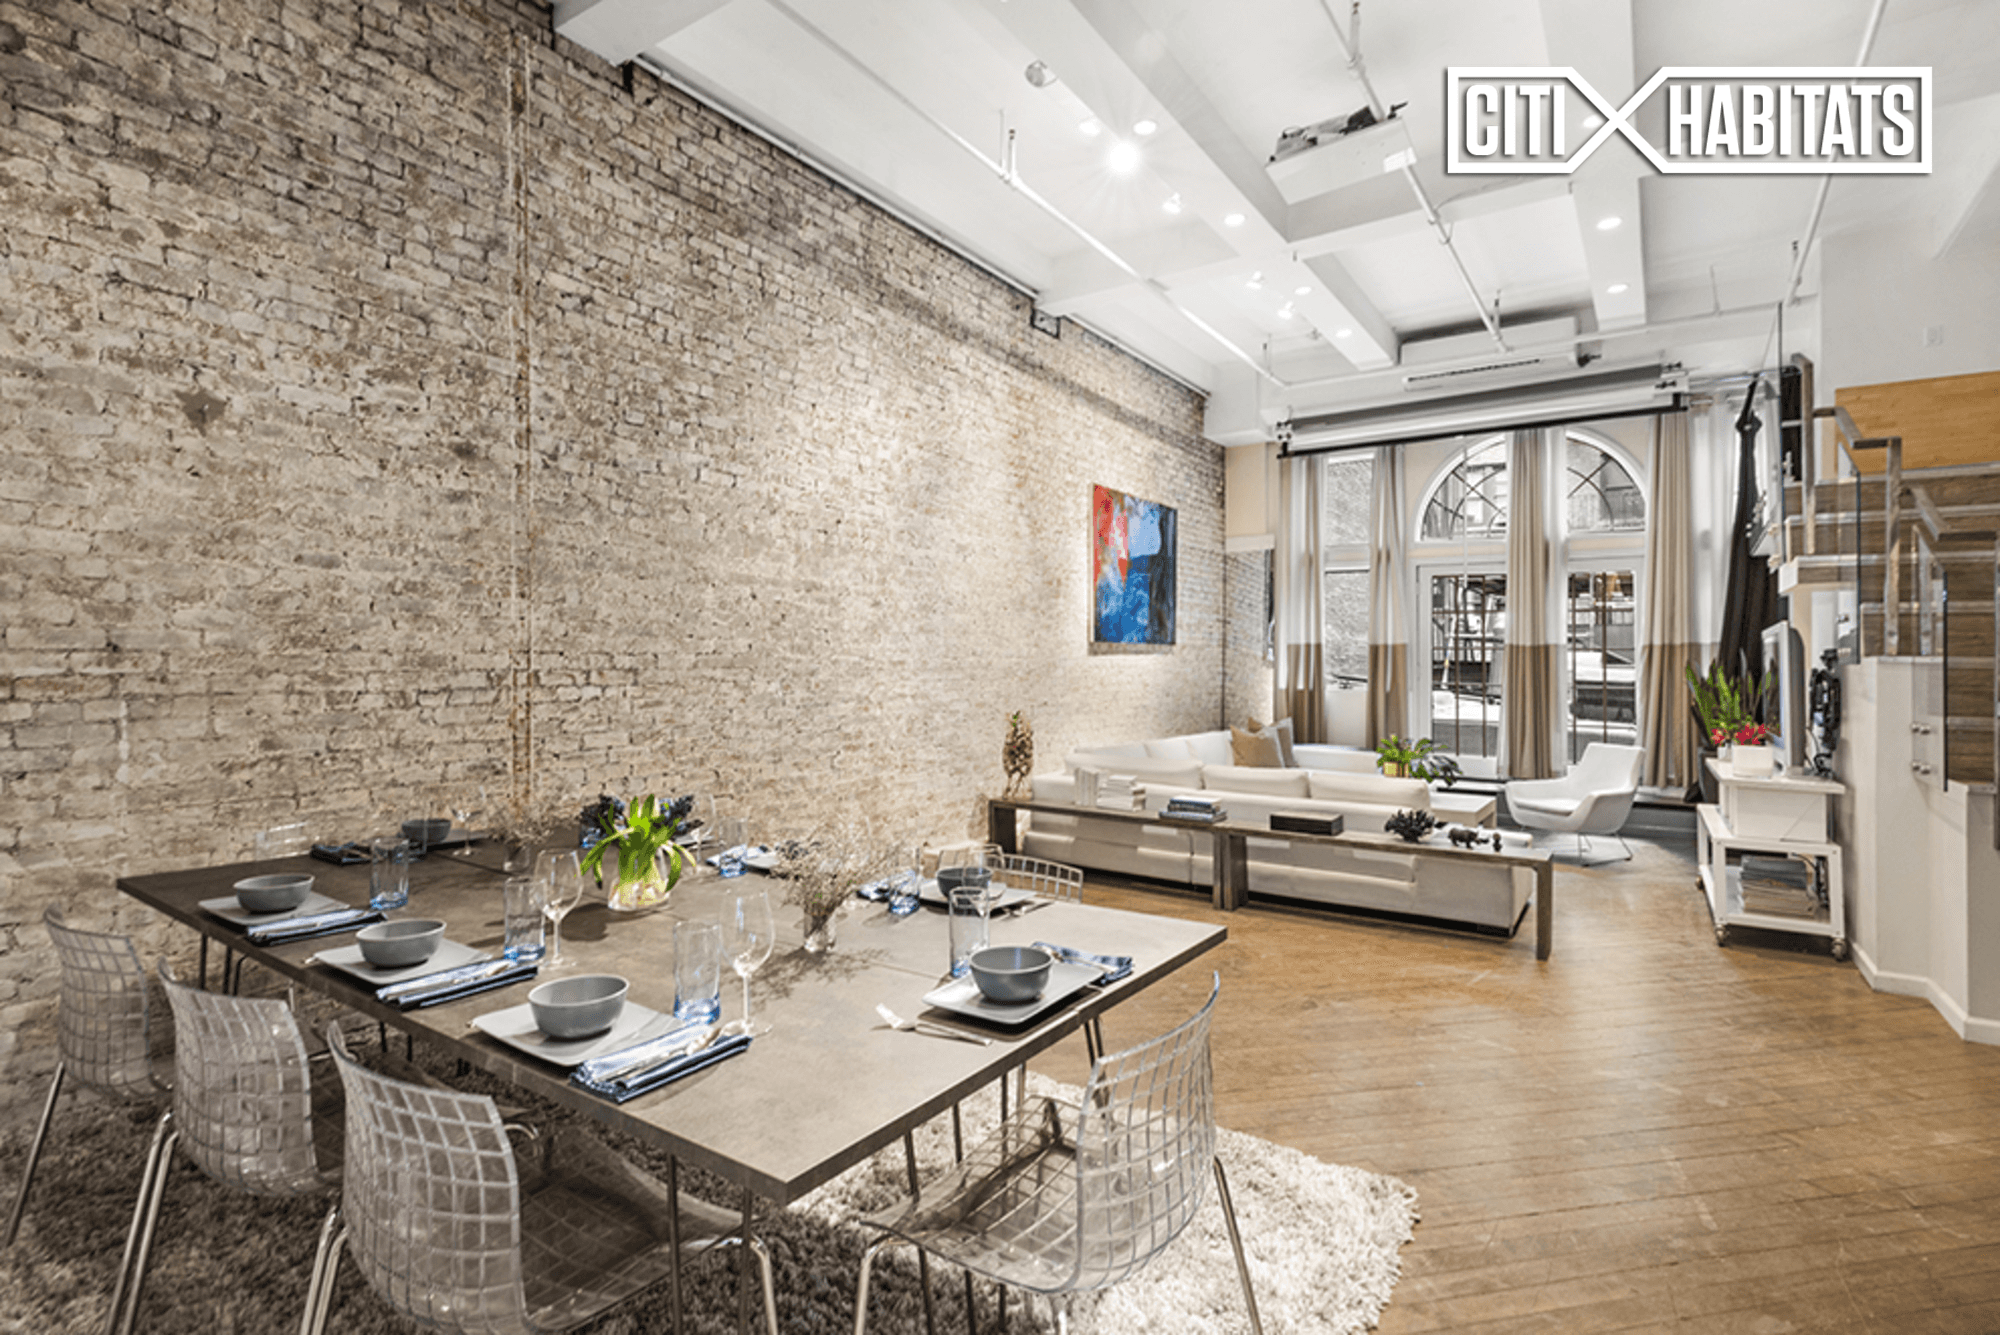 Rare opportunity to purchase a historic, convertible two bedroom 2 offices, 1 multi use room in a fabulous live work loft on Park Ave South in Flatiron.